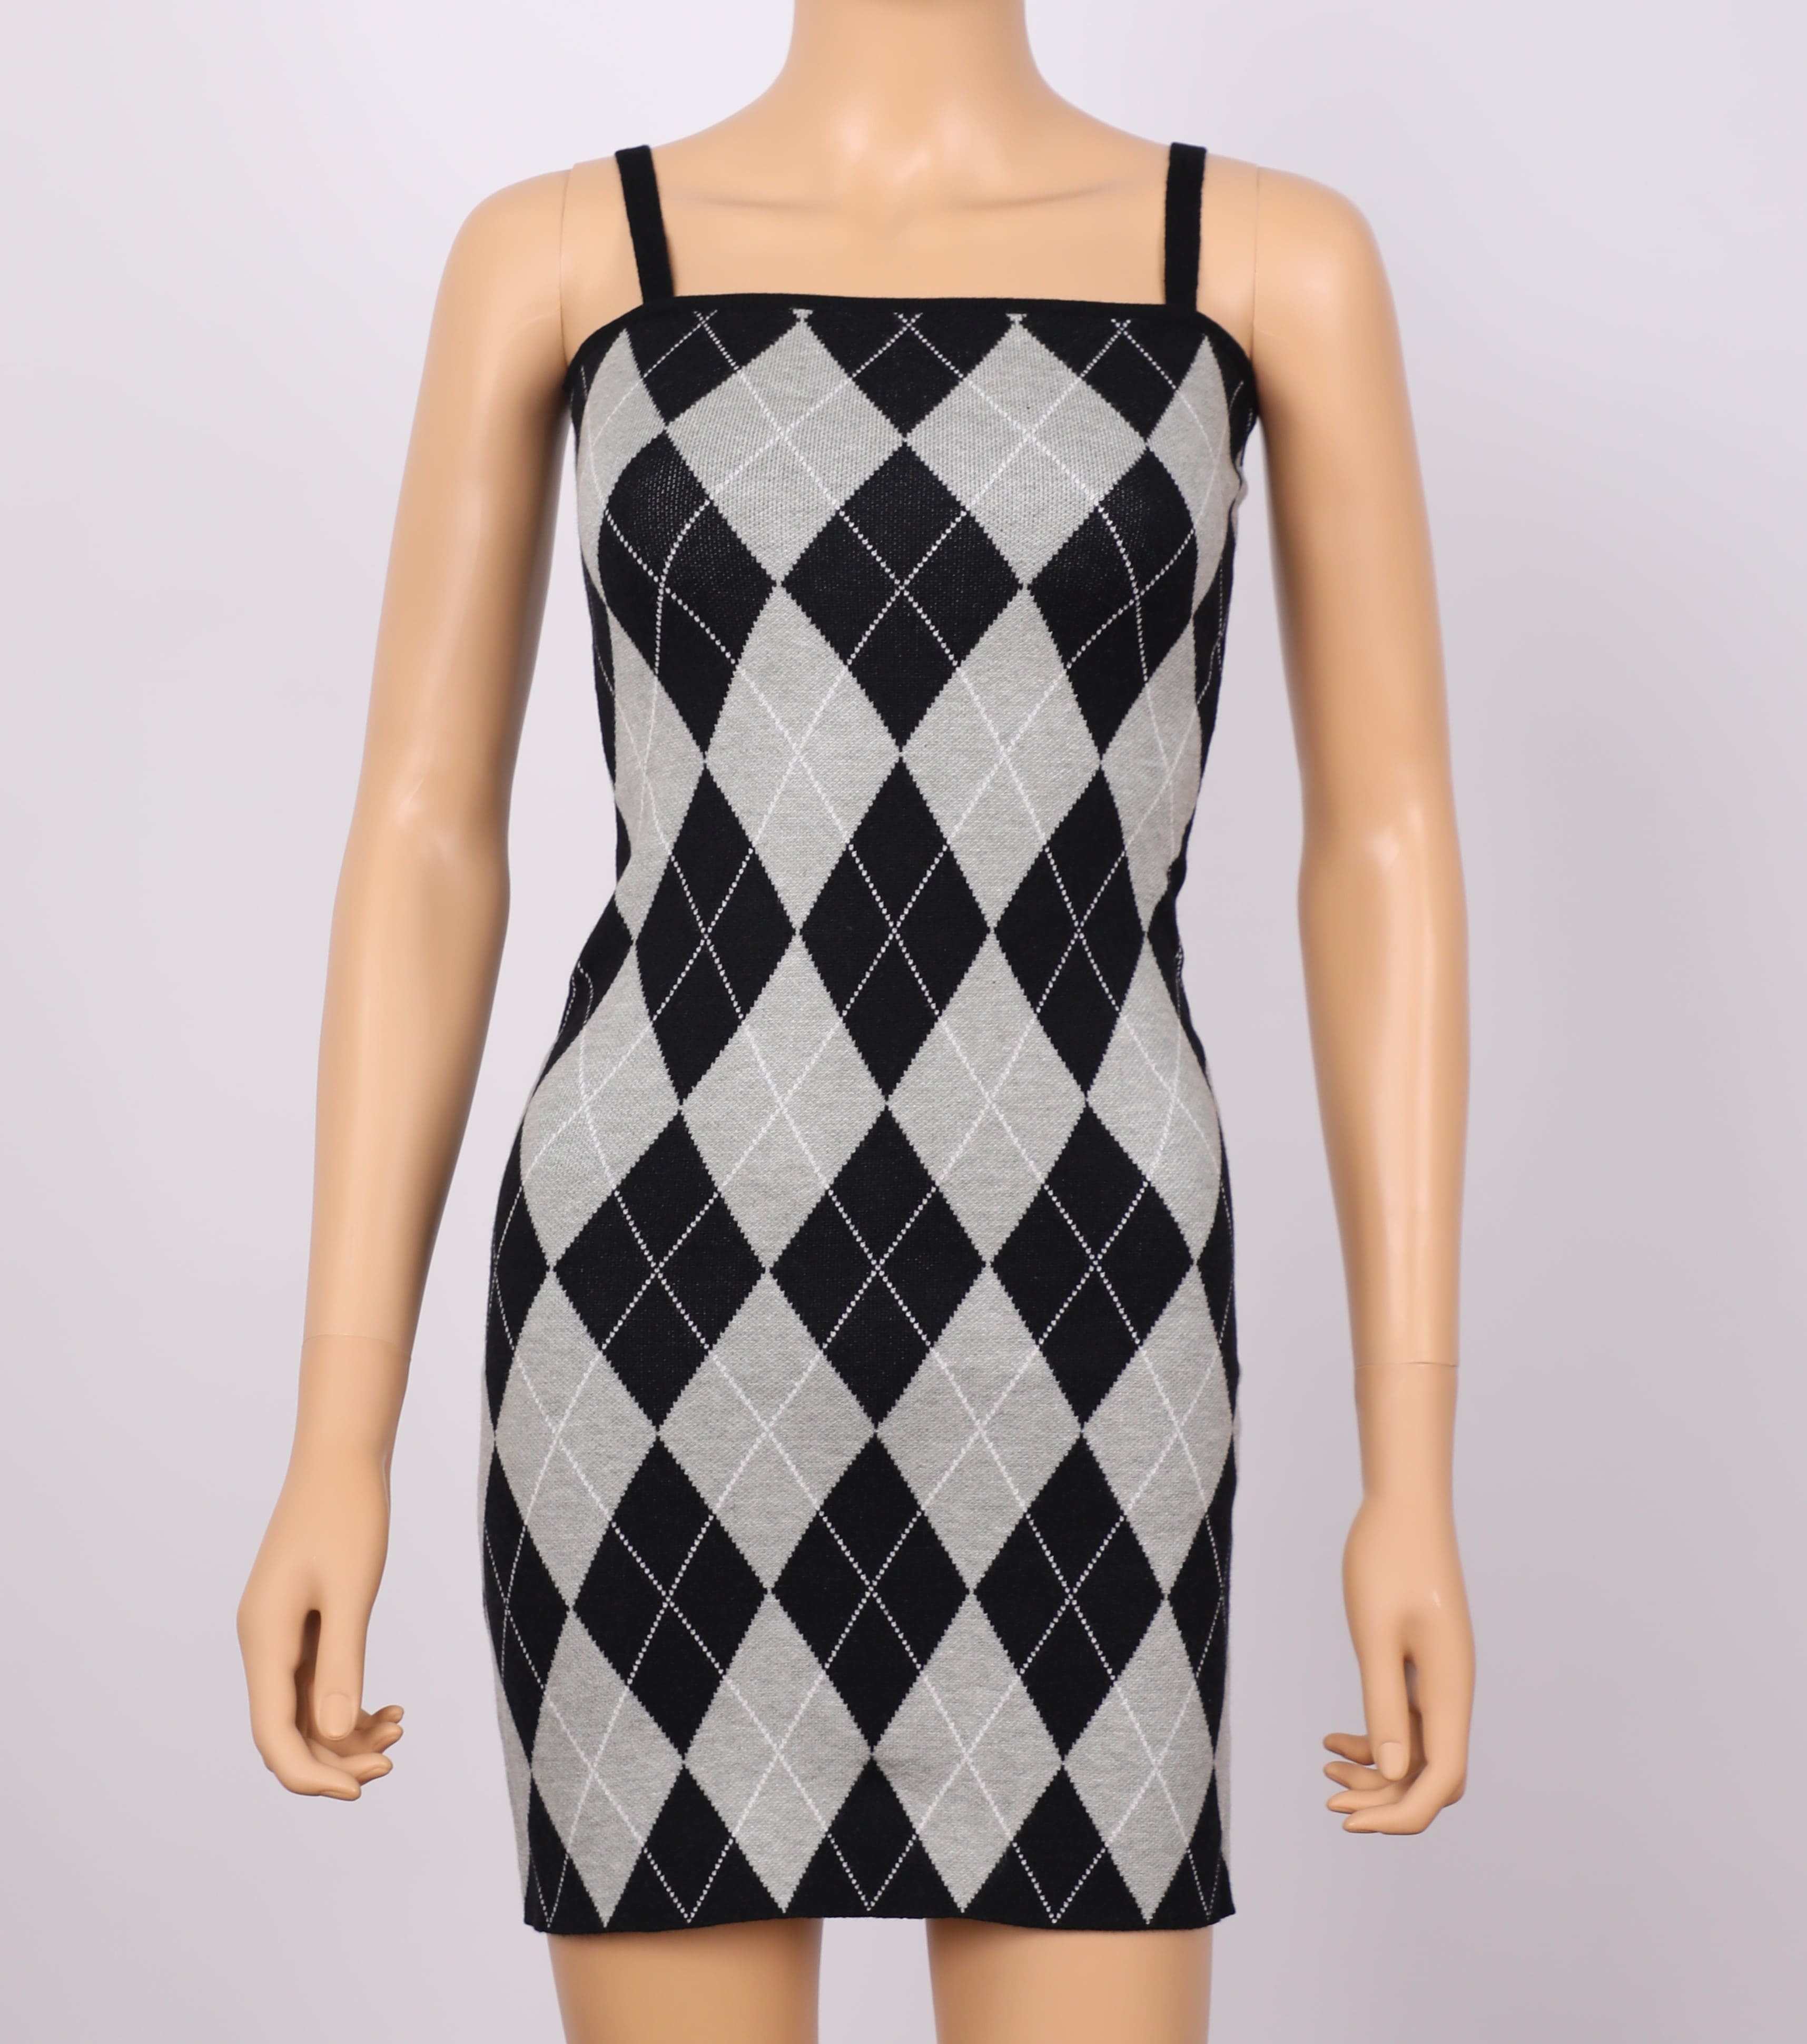 Checkerboard Style Dress On Sale